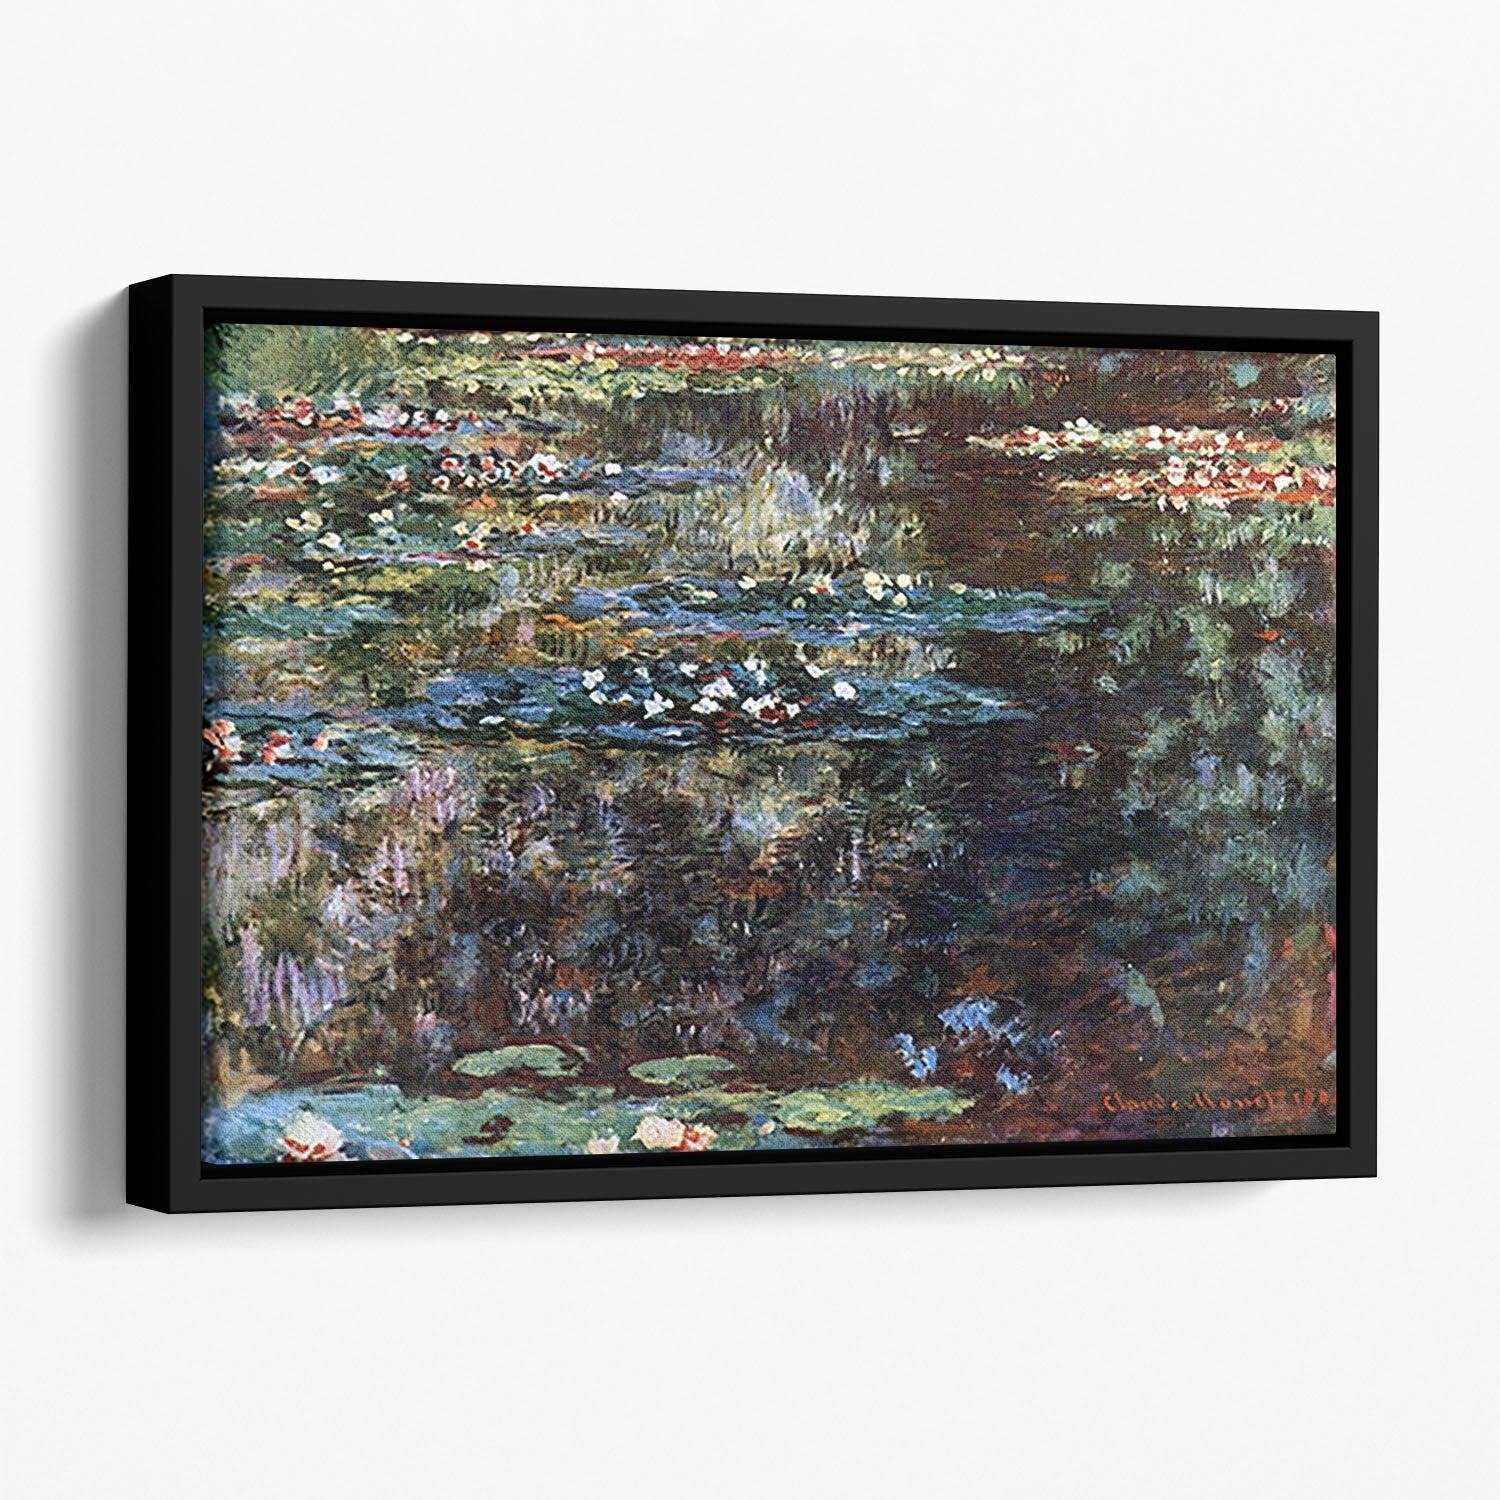 Water garden at Giverny by Monet Floating Framed Canvas